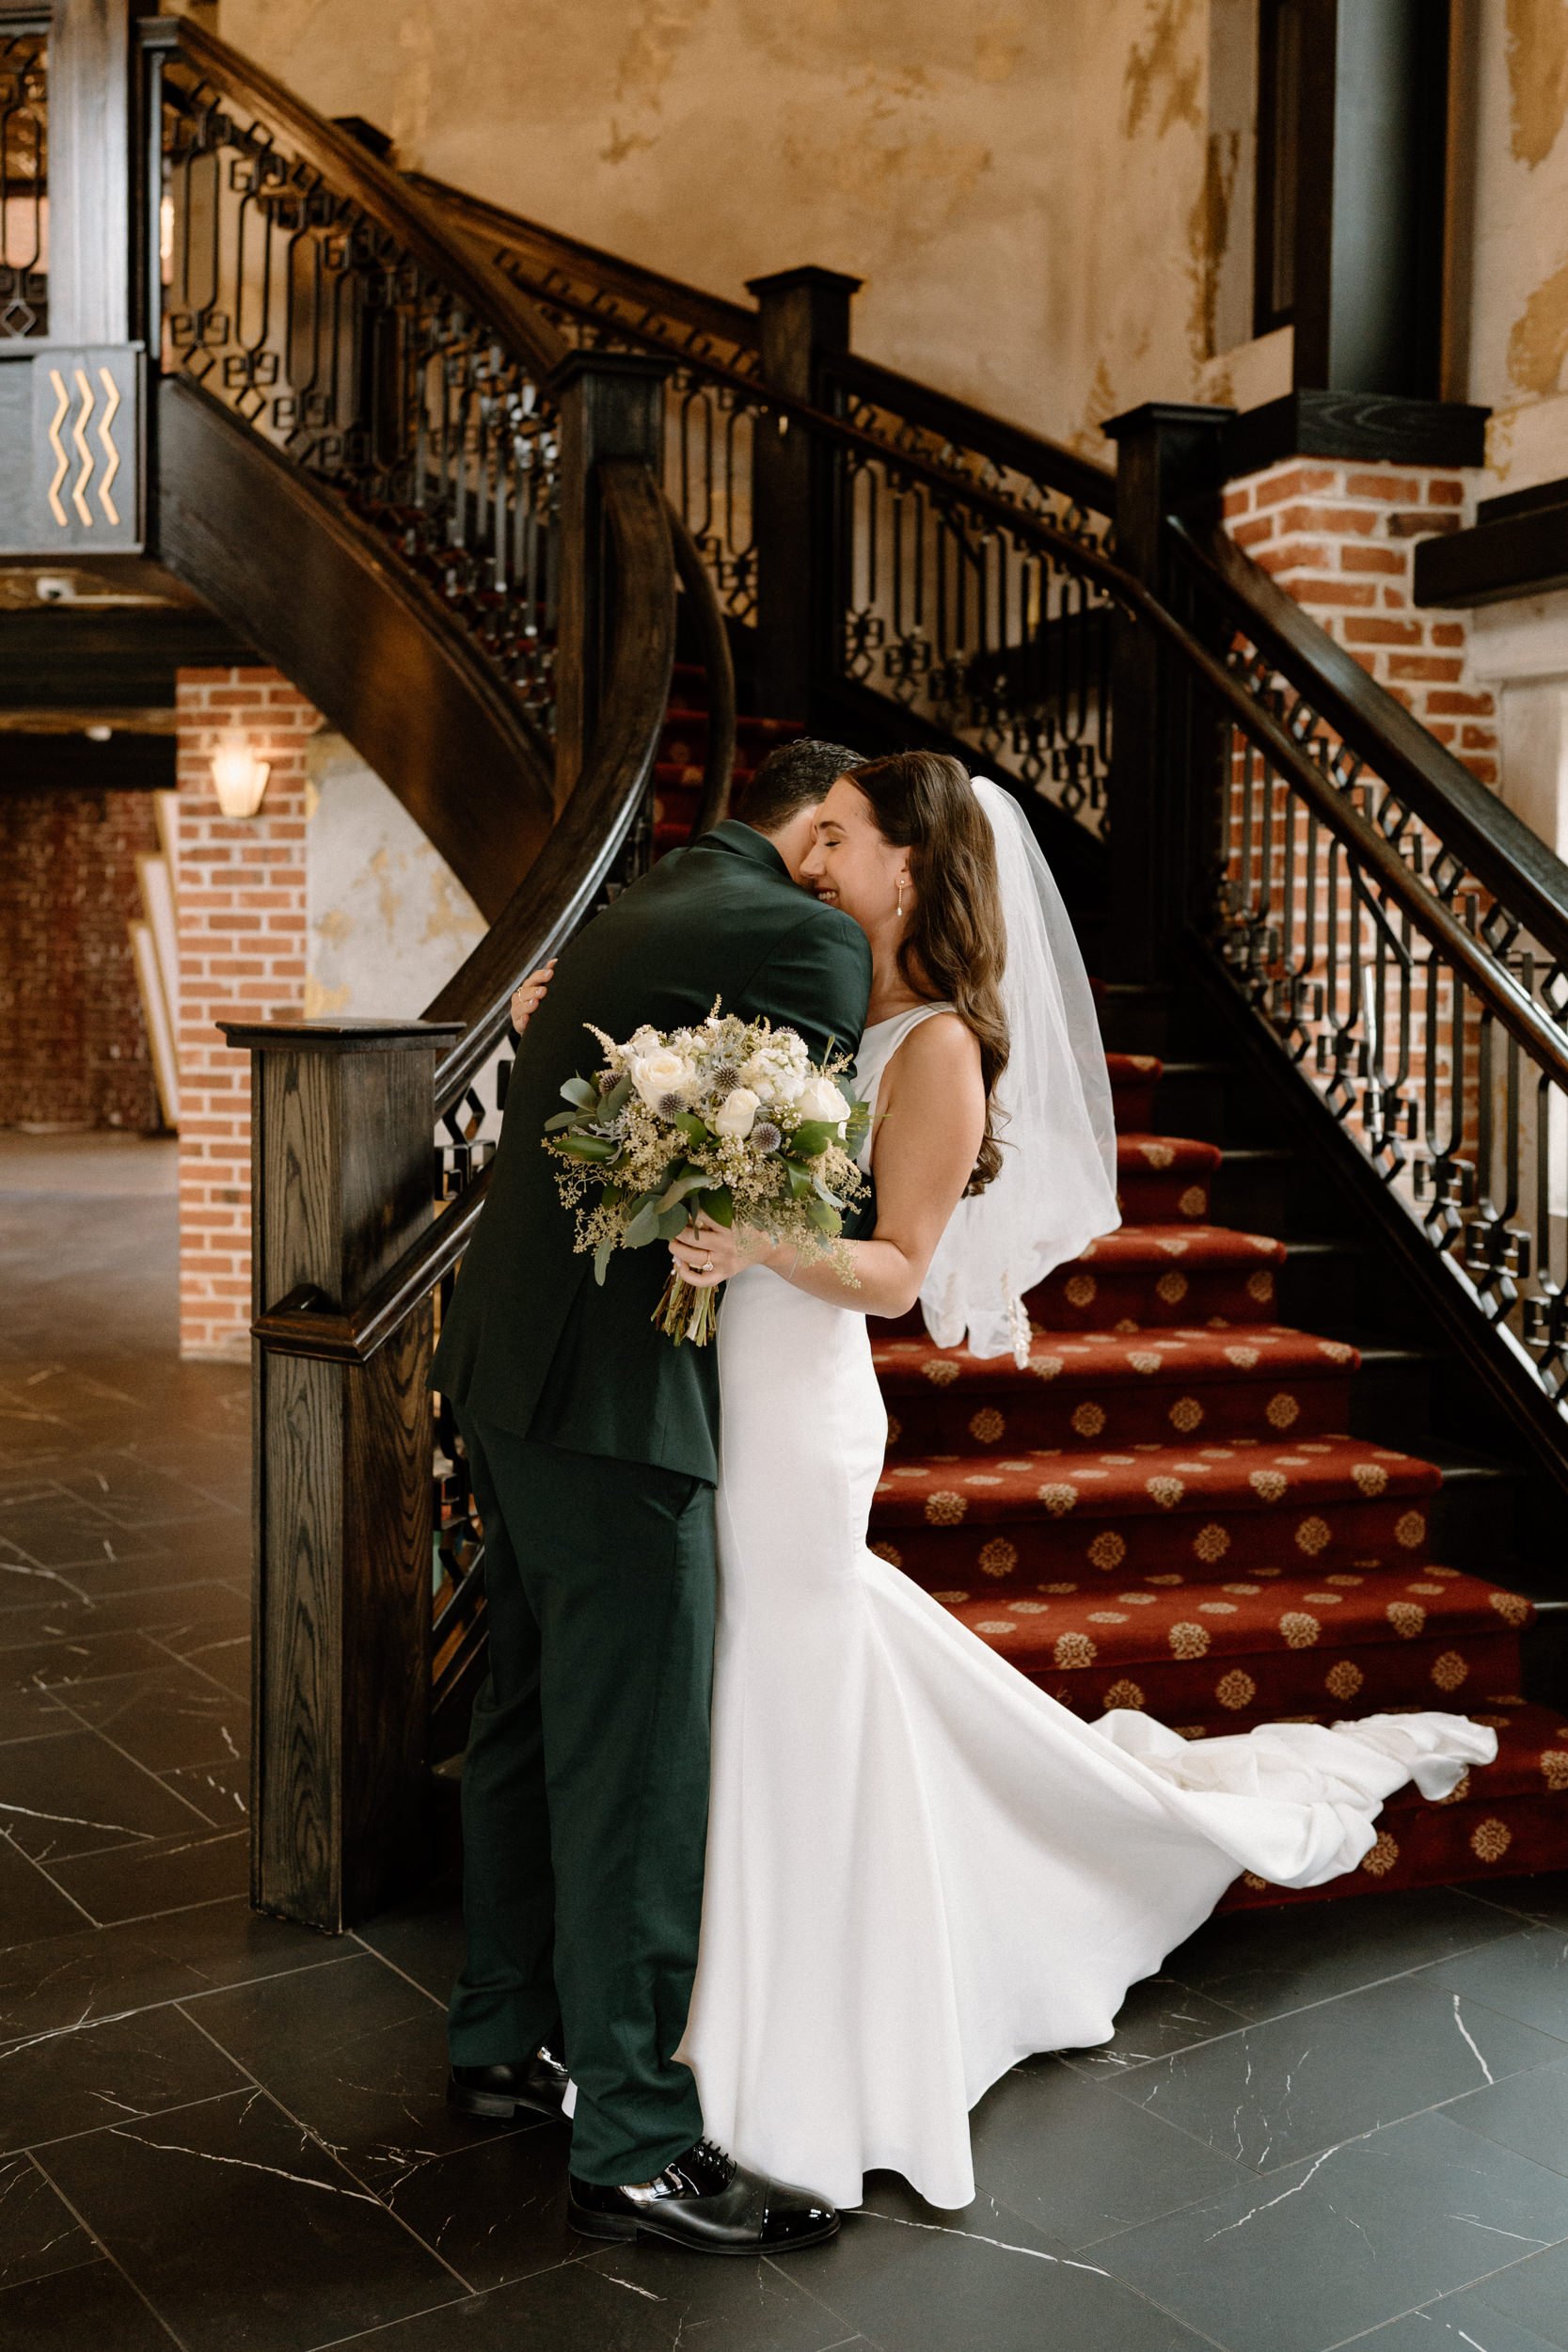 The bride and groom embrace at the bottom of the staircase at Ironworks in Denver, CO